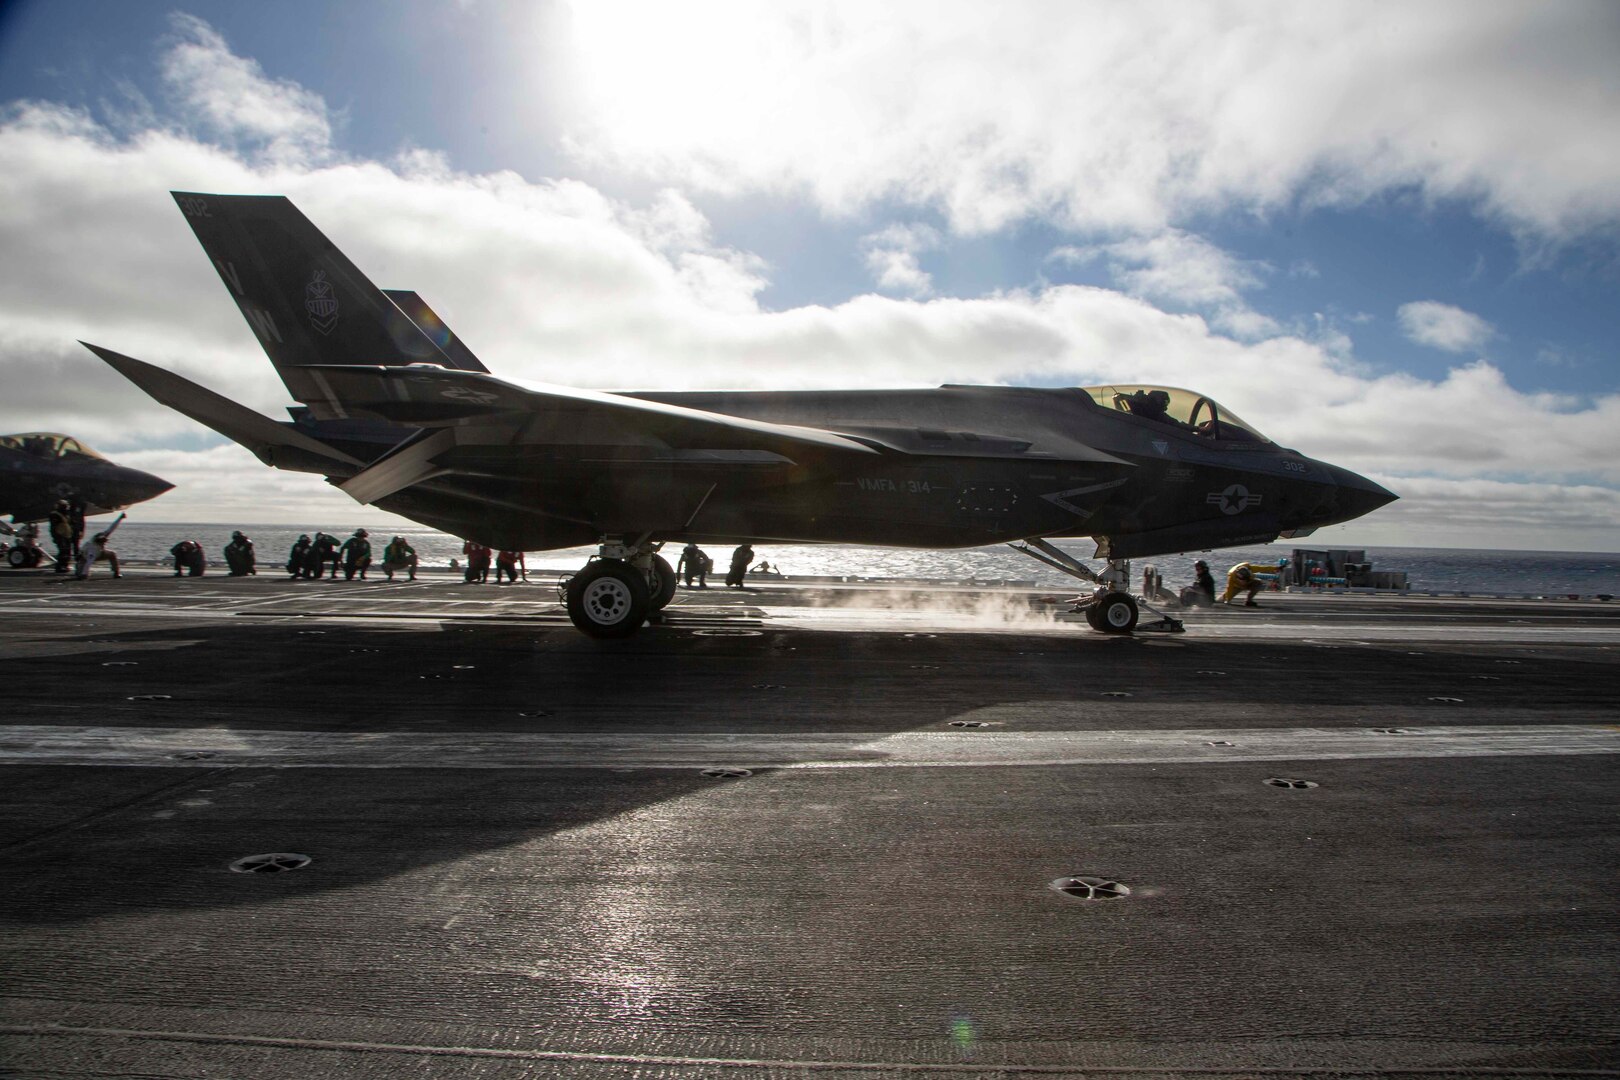 PACIFIC OCEAN (Nov. 10, 2021) An F-35C Lightning II, assigned to Marine Wing Fighter Attack Squadron (VMFA) 314, launches from the flight deck of the aircraft carrier USS Abraham Lincoln (CVN 72).  Abraham Lincoln is underway conducting routine operations in the U.S. 3rd Fleet.